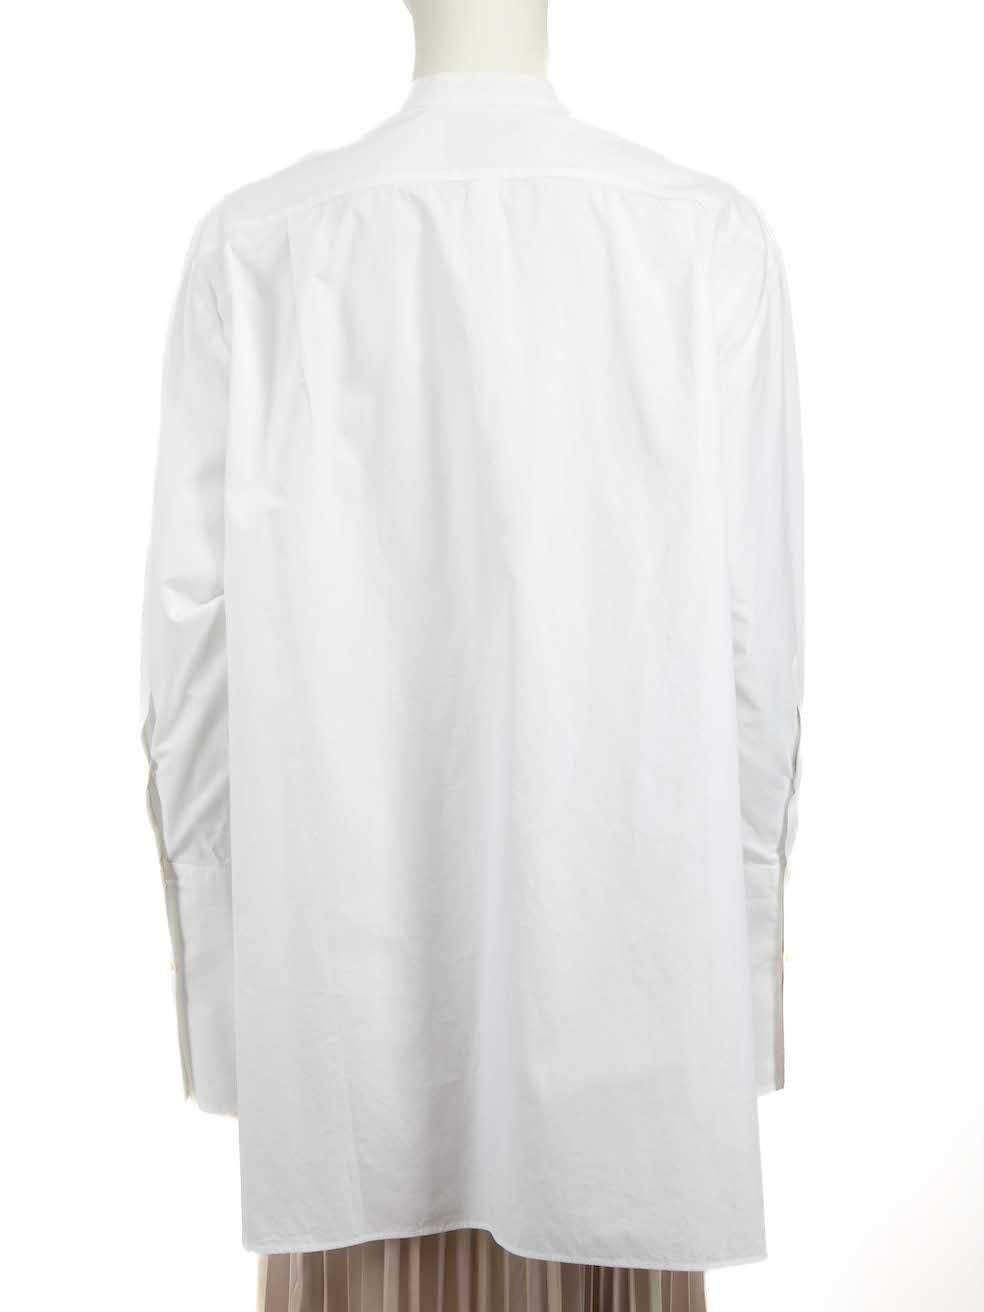 Studio Nicholson White Buttoned Collarless Shirt Size L In Good Condition For Sale In London, GB